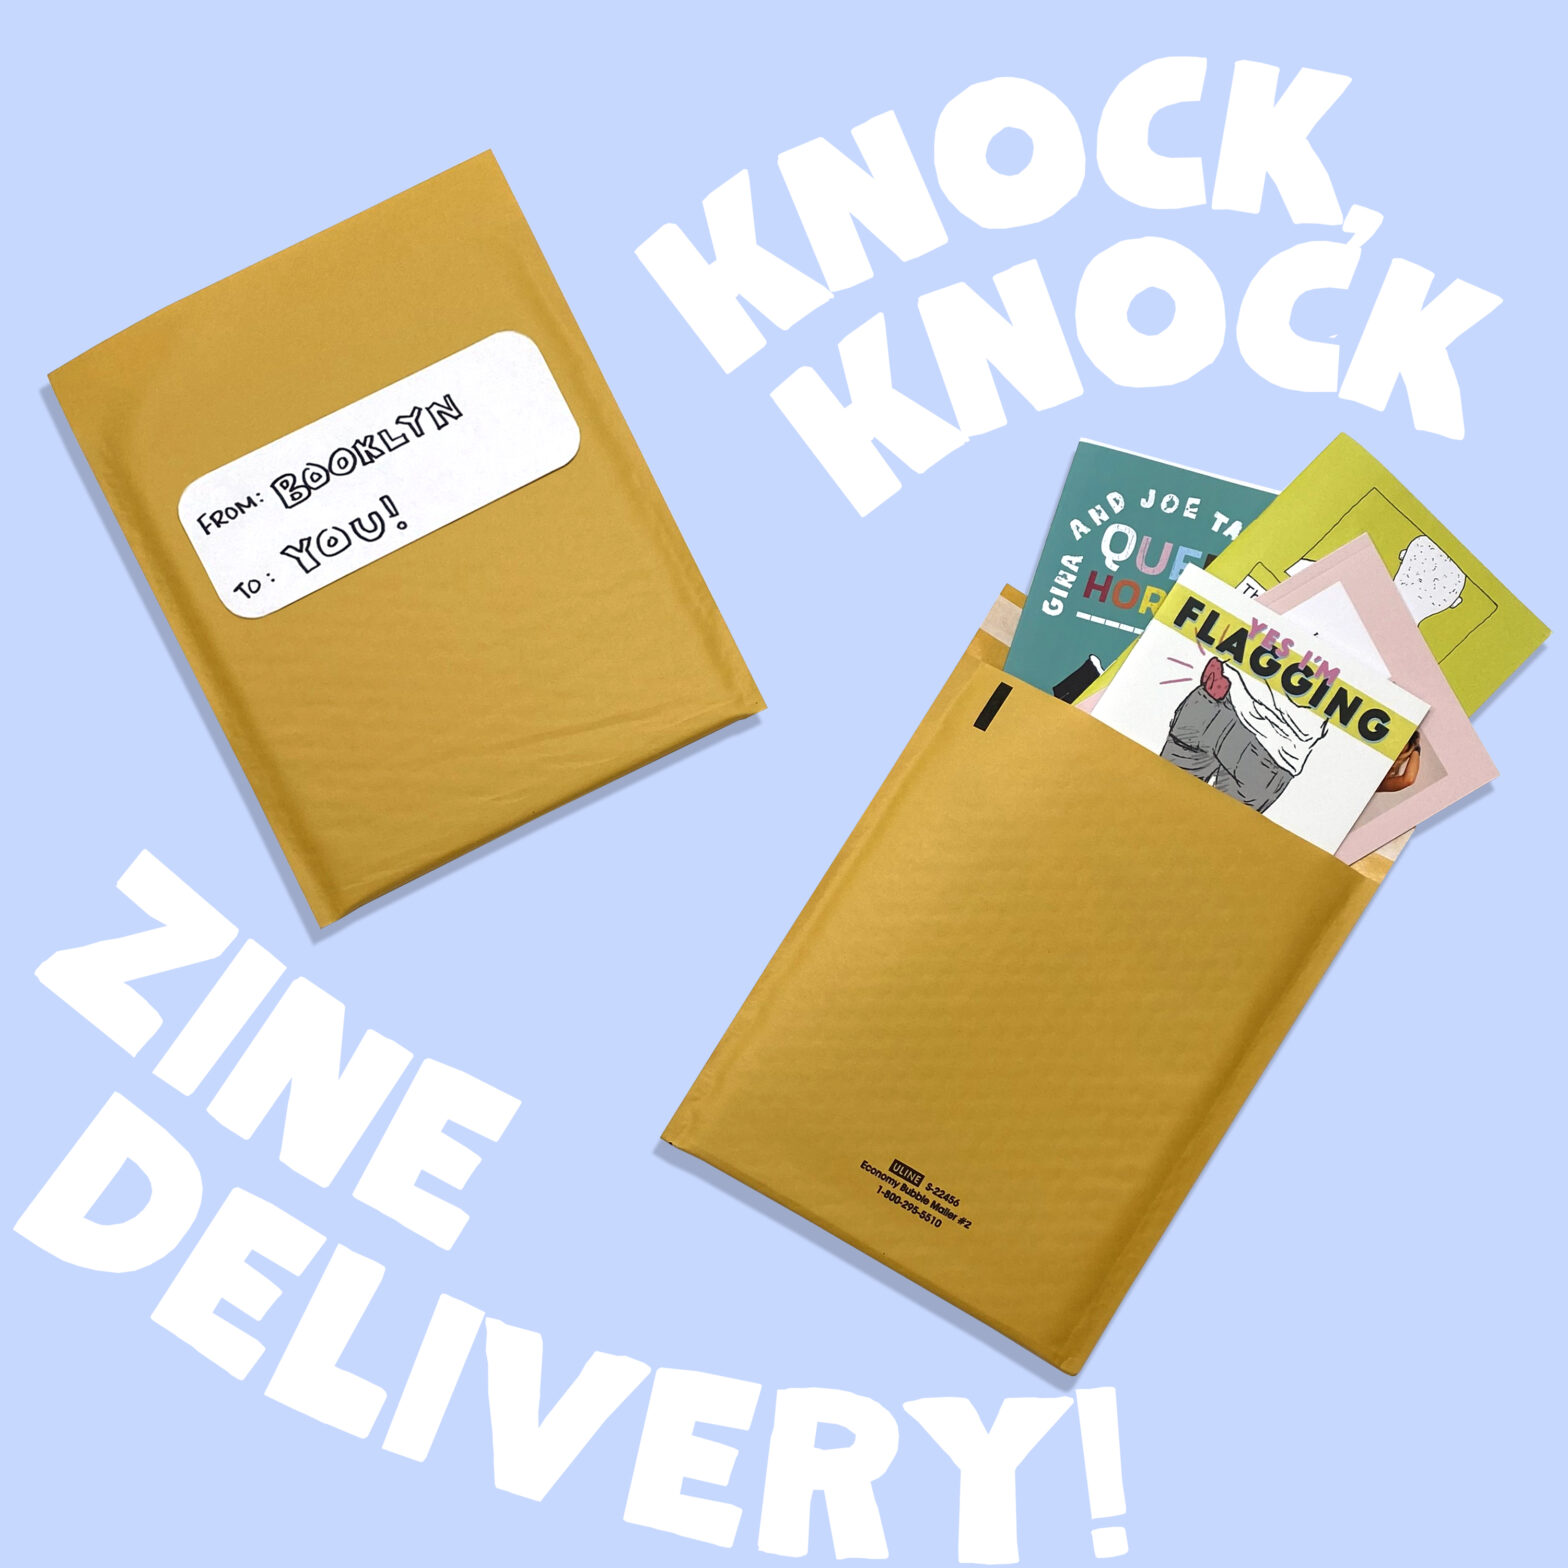 Get zines in the mail with a special deal